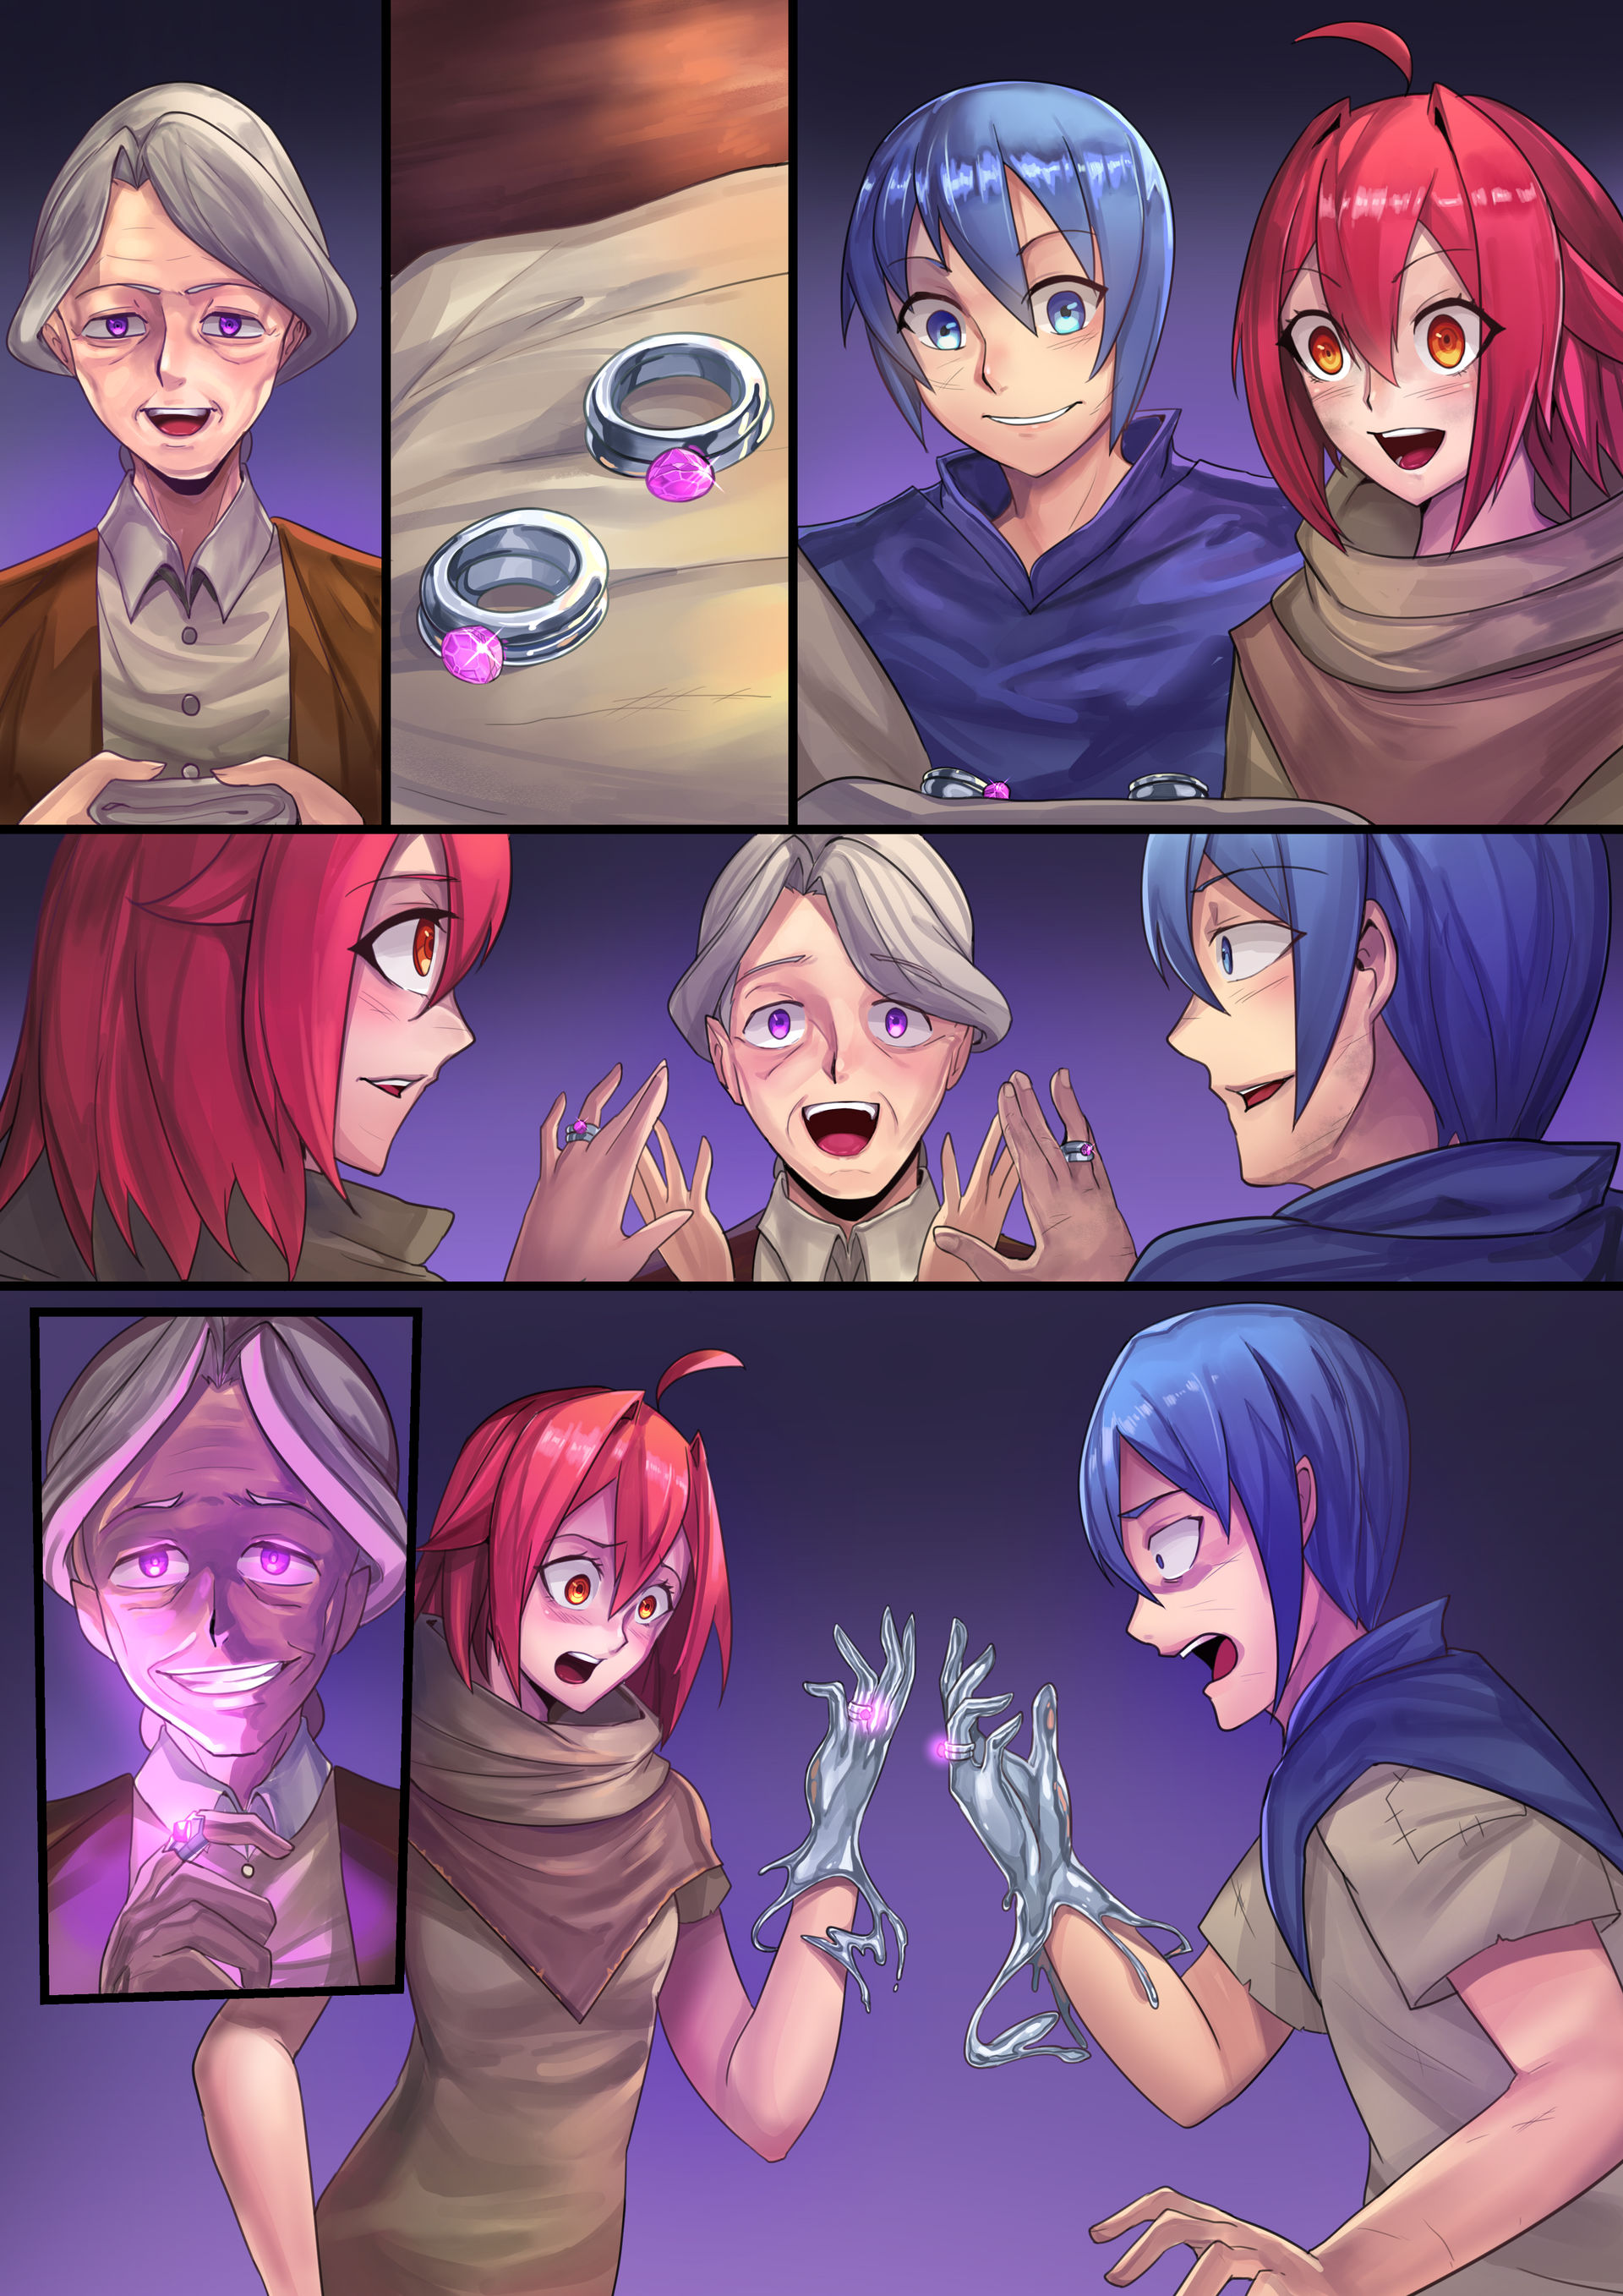 Ninja and the dark cult 2 page 3 by ibenz009 on DeviantArt